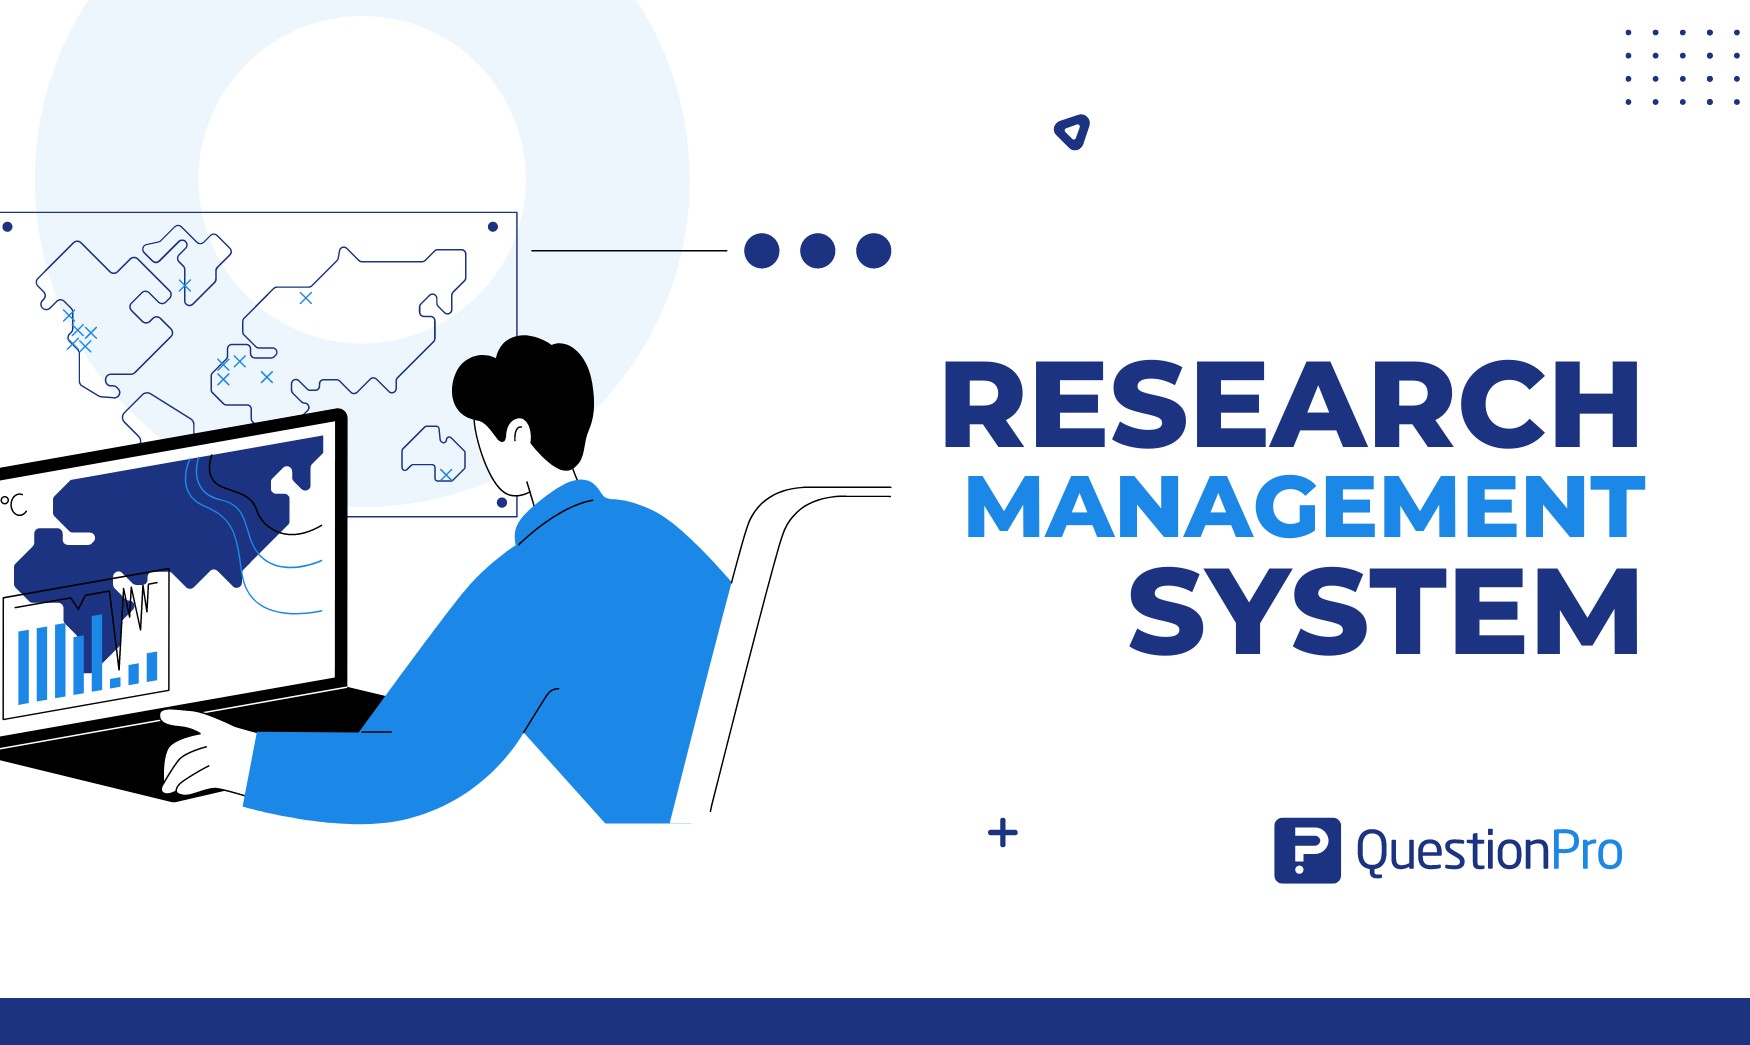 Research Management System: What it is & Why You Need It